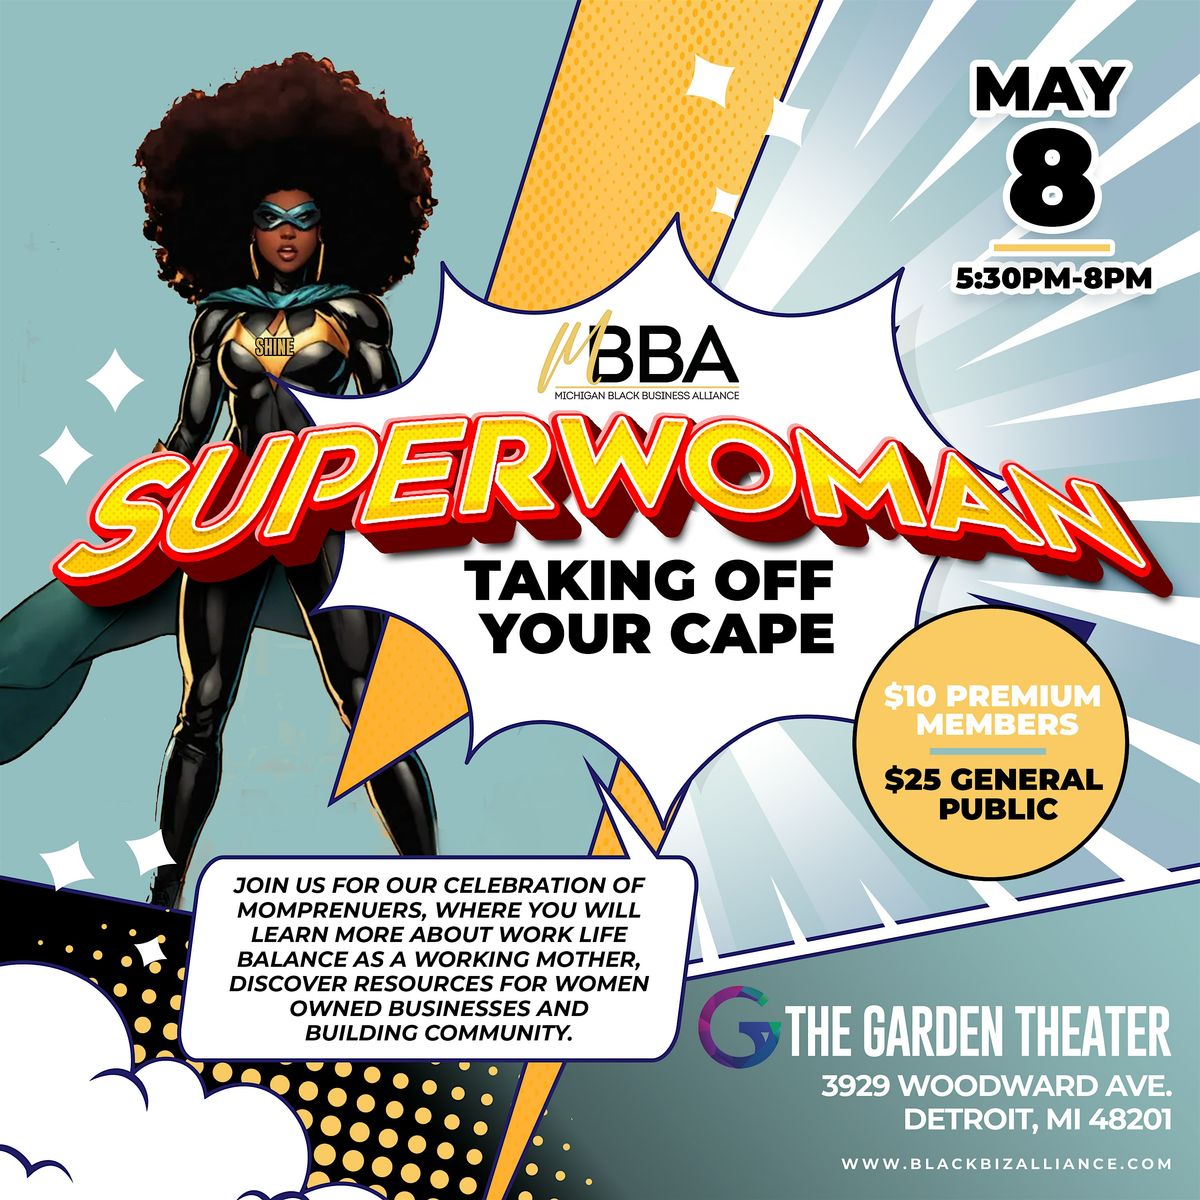 Super Woman | Taking off Your Cape